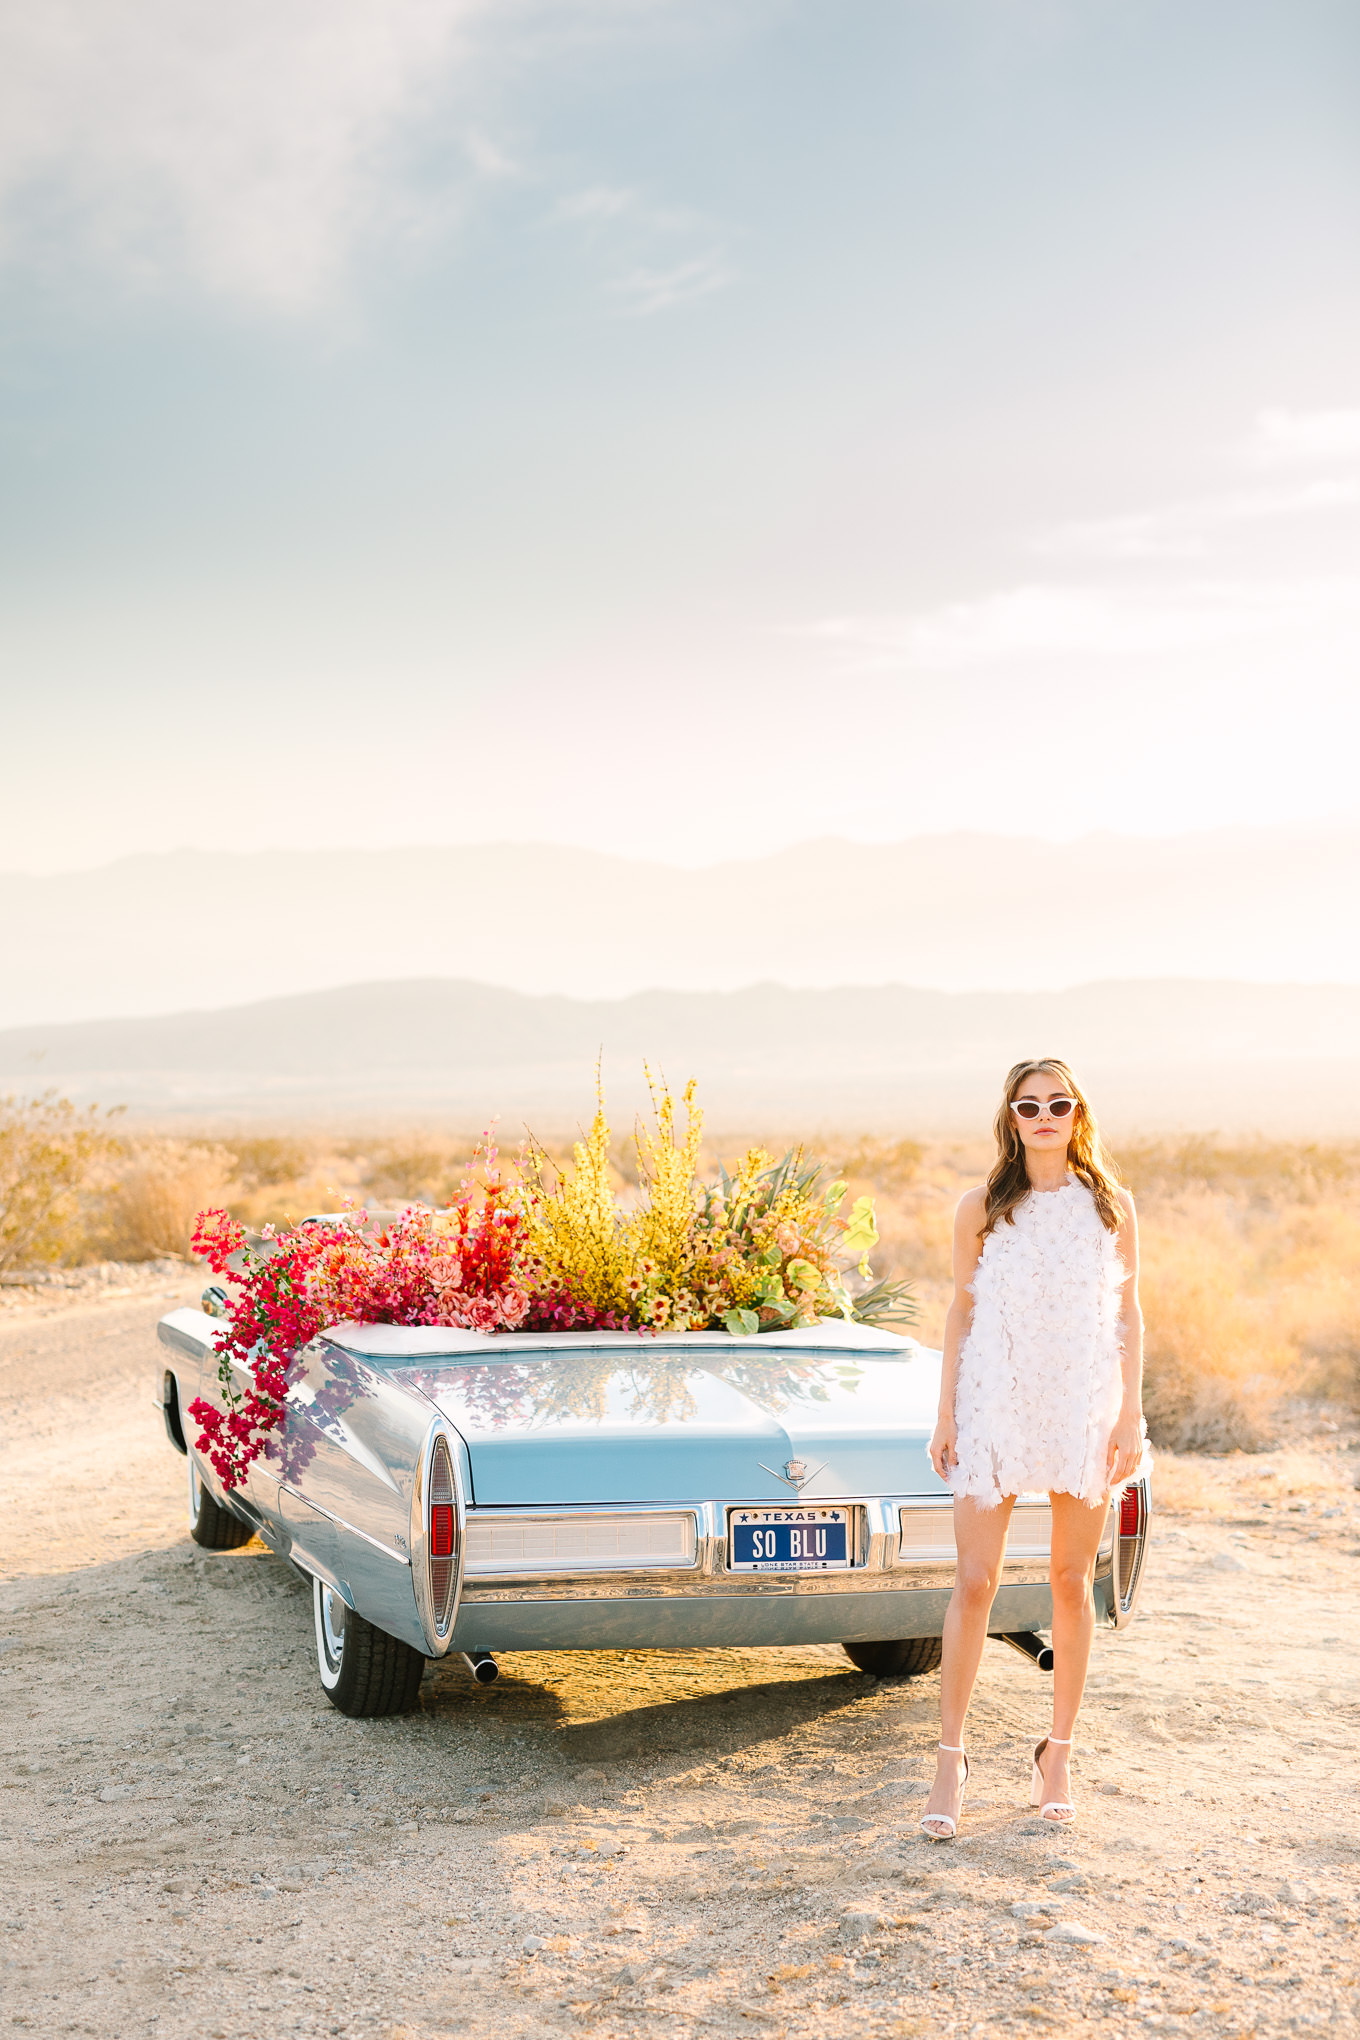 Elopement style with blue classic car filled with flowers | Kindred Presets x Mary Costa Photography Sands Hotel Ad Campaign | Colorful Palm Springs wedding photography | #palmspringsphotographer #lightroompresets #sandshotel #pinkhotel   Source: Mary Costa Photography | Los Angeles